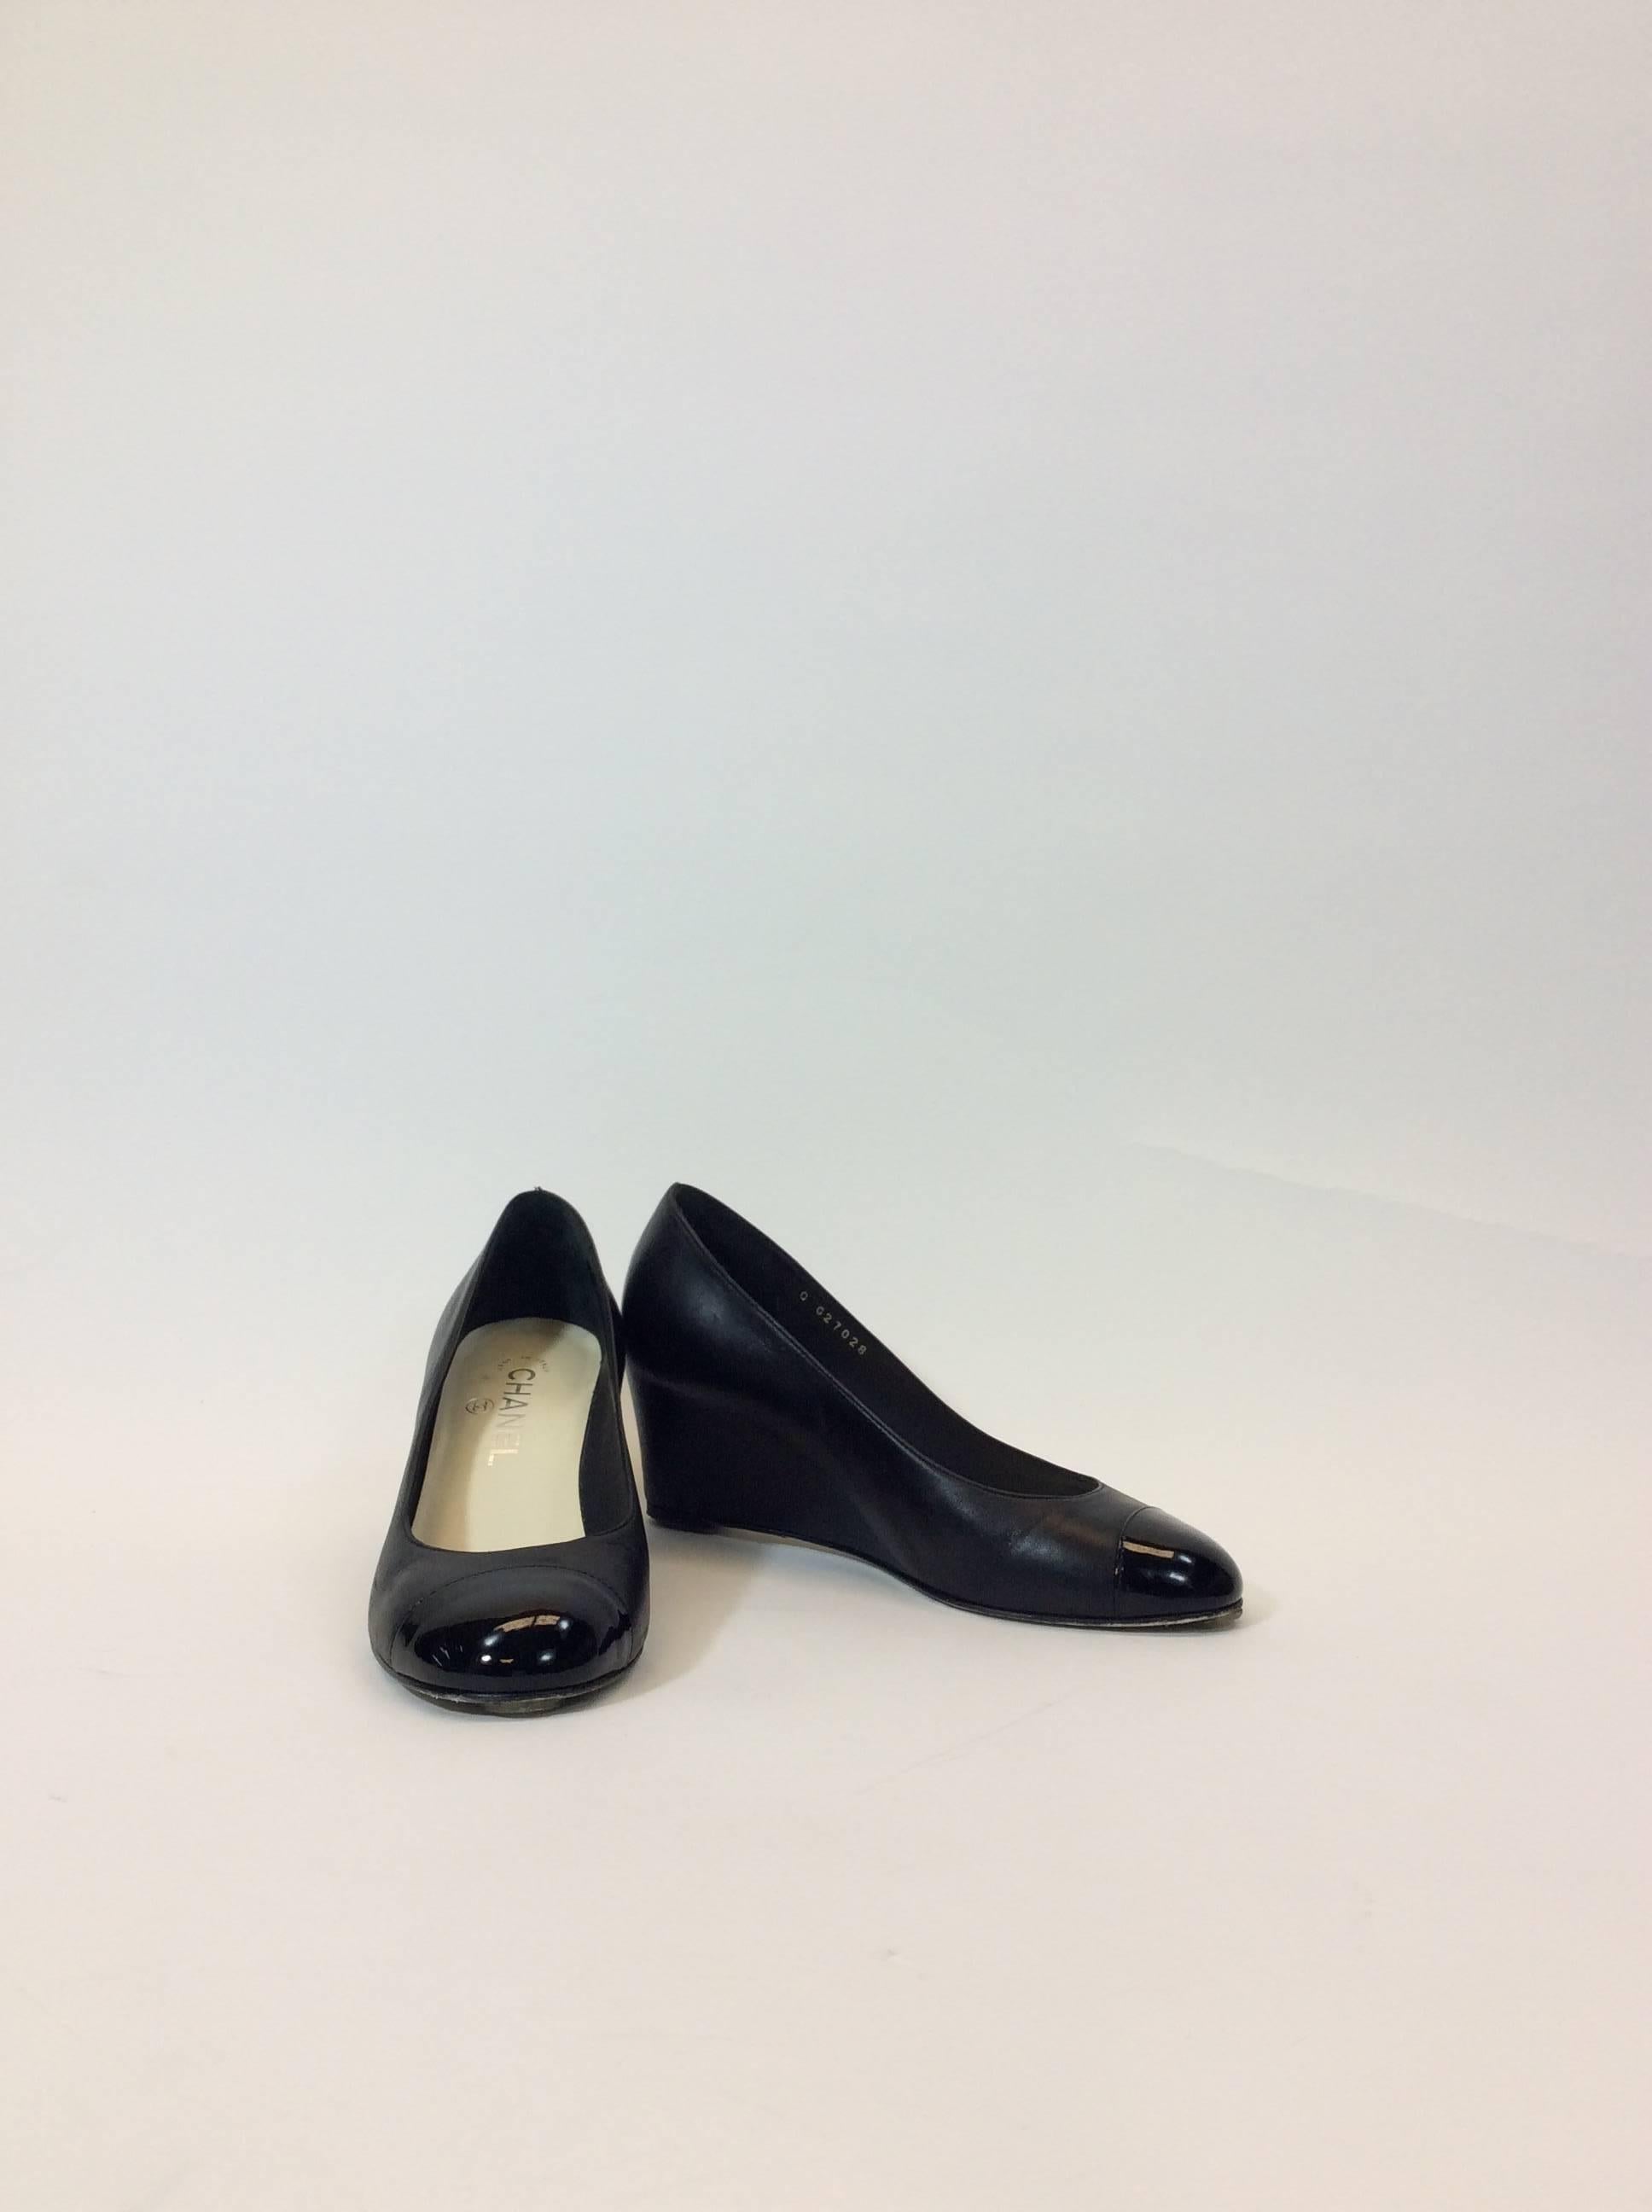 Black Leather Wedge 
Patent Leather Trim on Toe
Silvertone CC On side of Heel
Wear on Bottom of Shoes
2.5" Inch Heel
3" Inch Sole